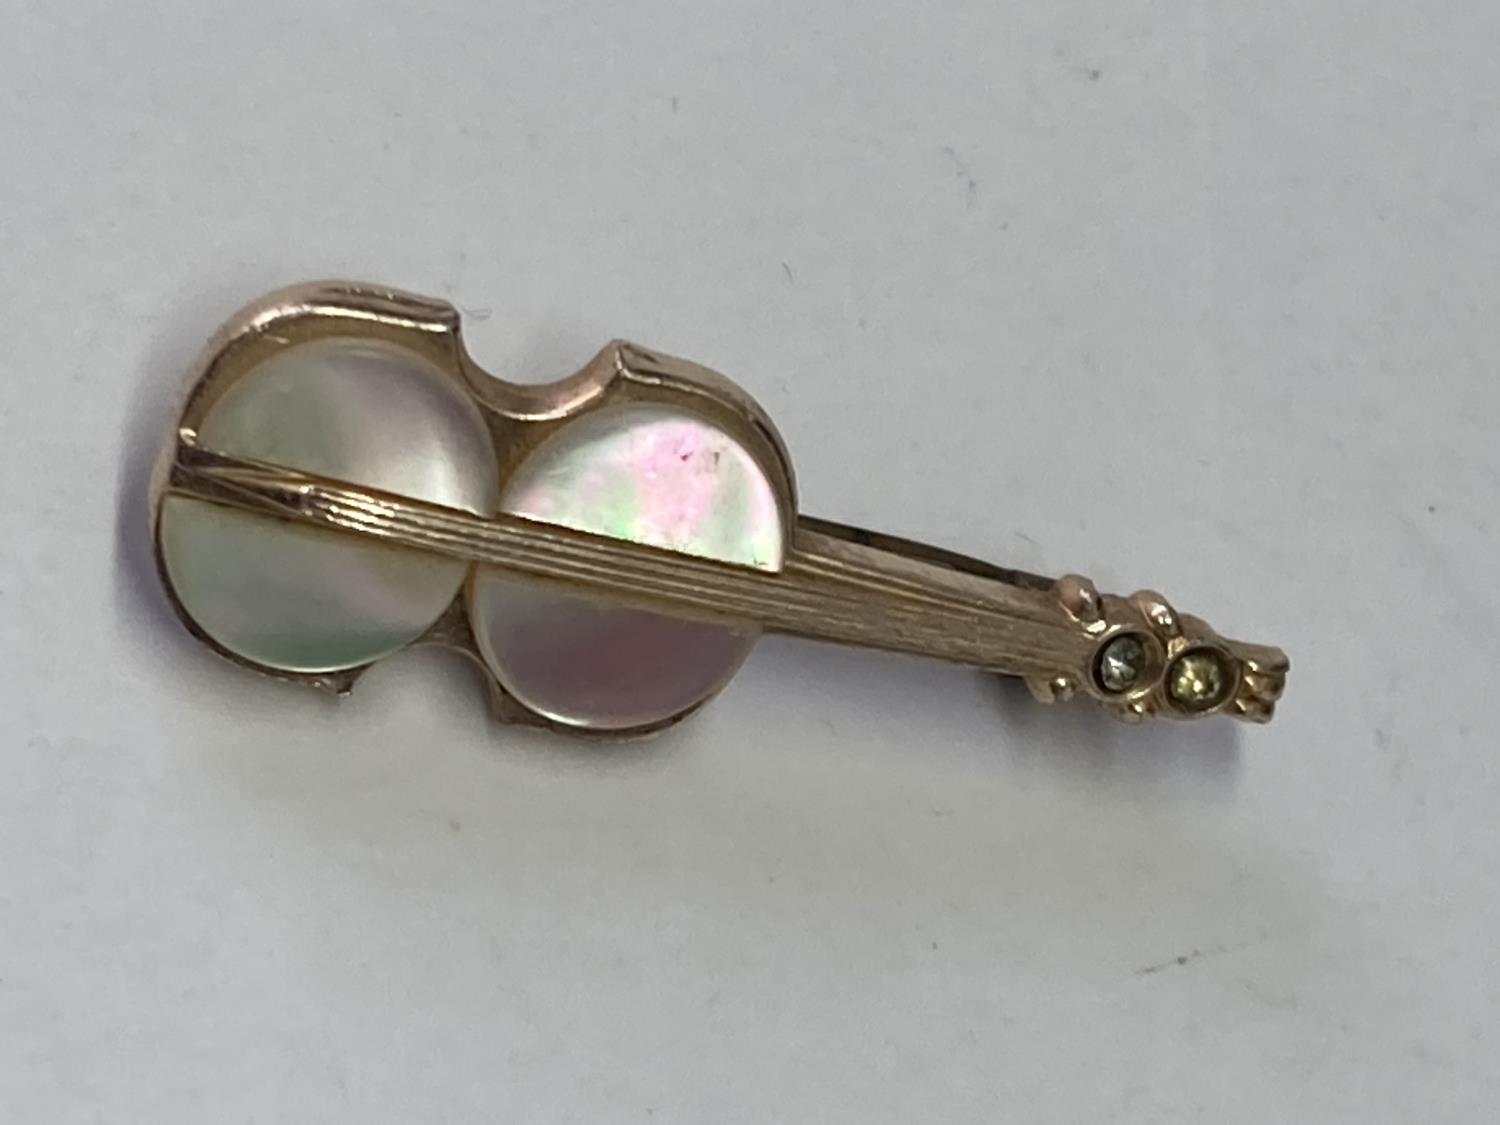 A RARE VINTAGE BEATLES GUITAR BROOCH AND A MOTHER OF PEARL EXAMPLE - Image 9 of 10